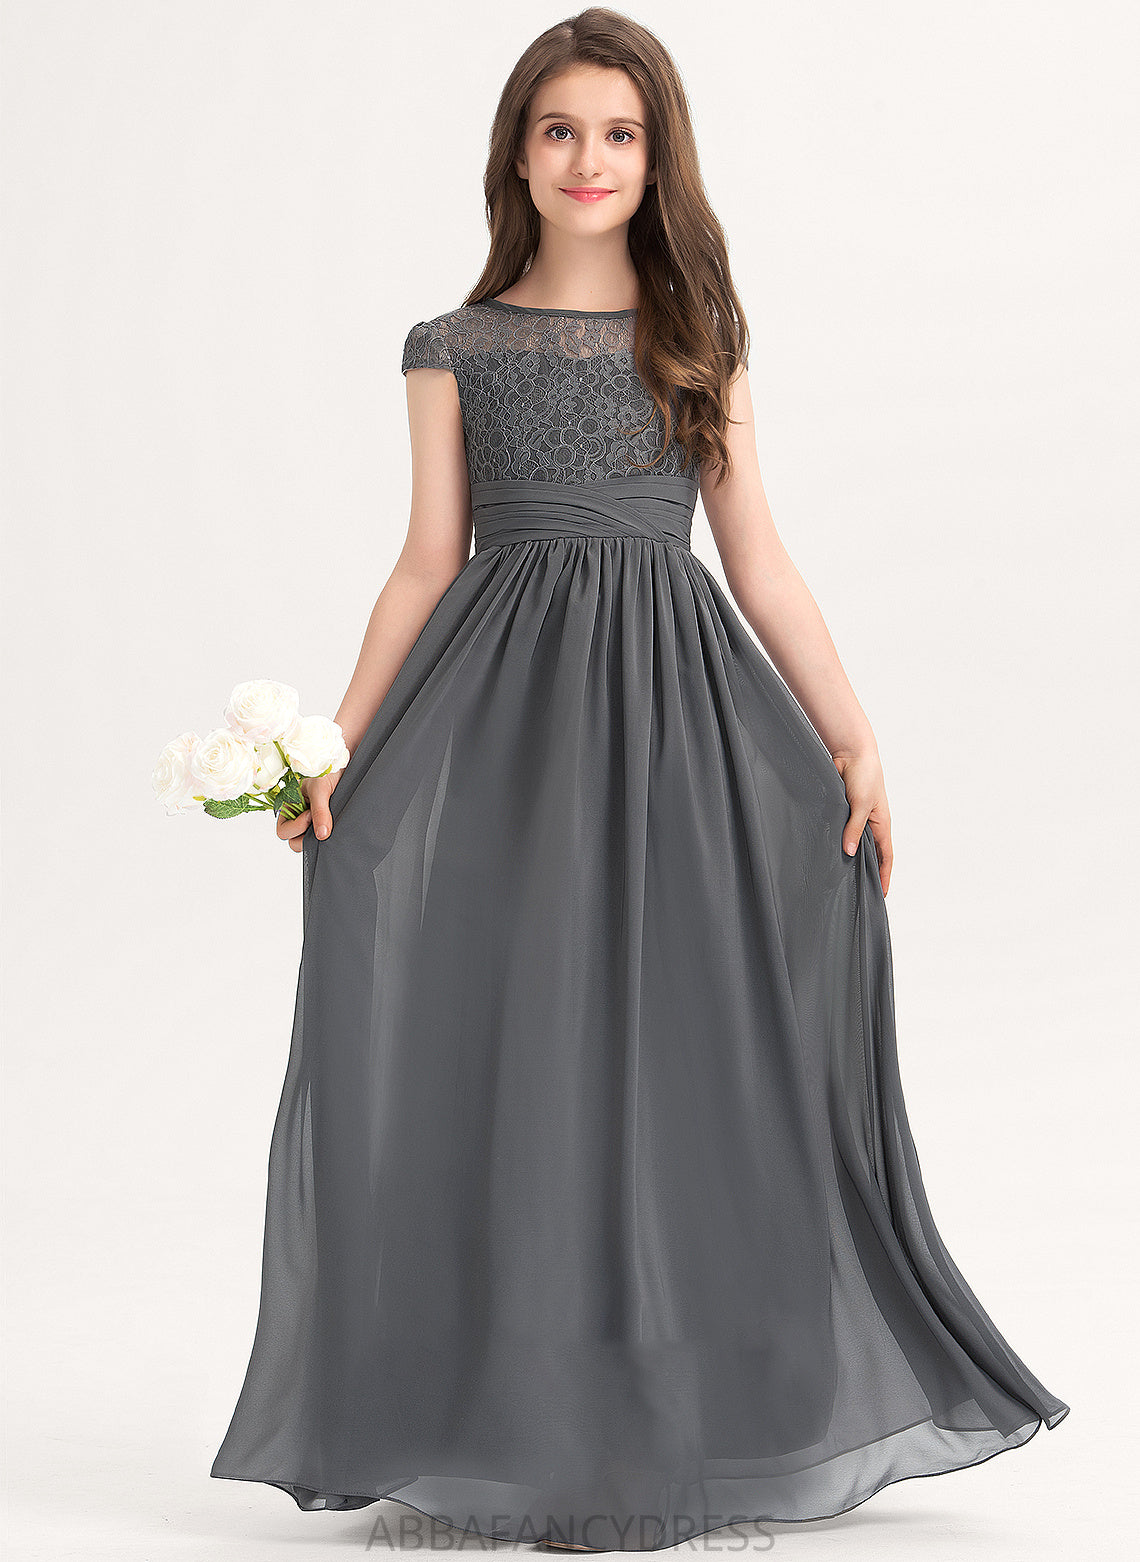 Scoop Neck Floor-Length Junior Bridesmaid Dresses Amber Chiffon Lace Ruffle A-Line With